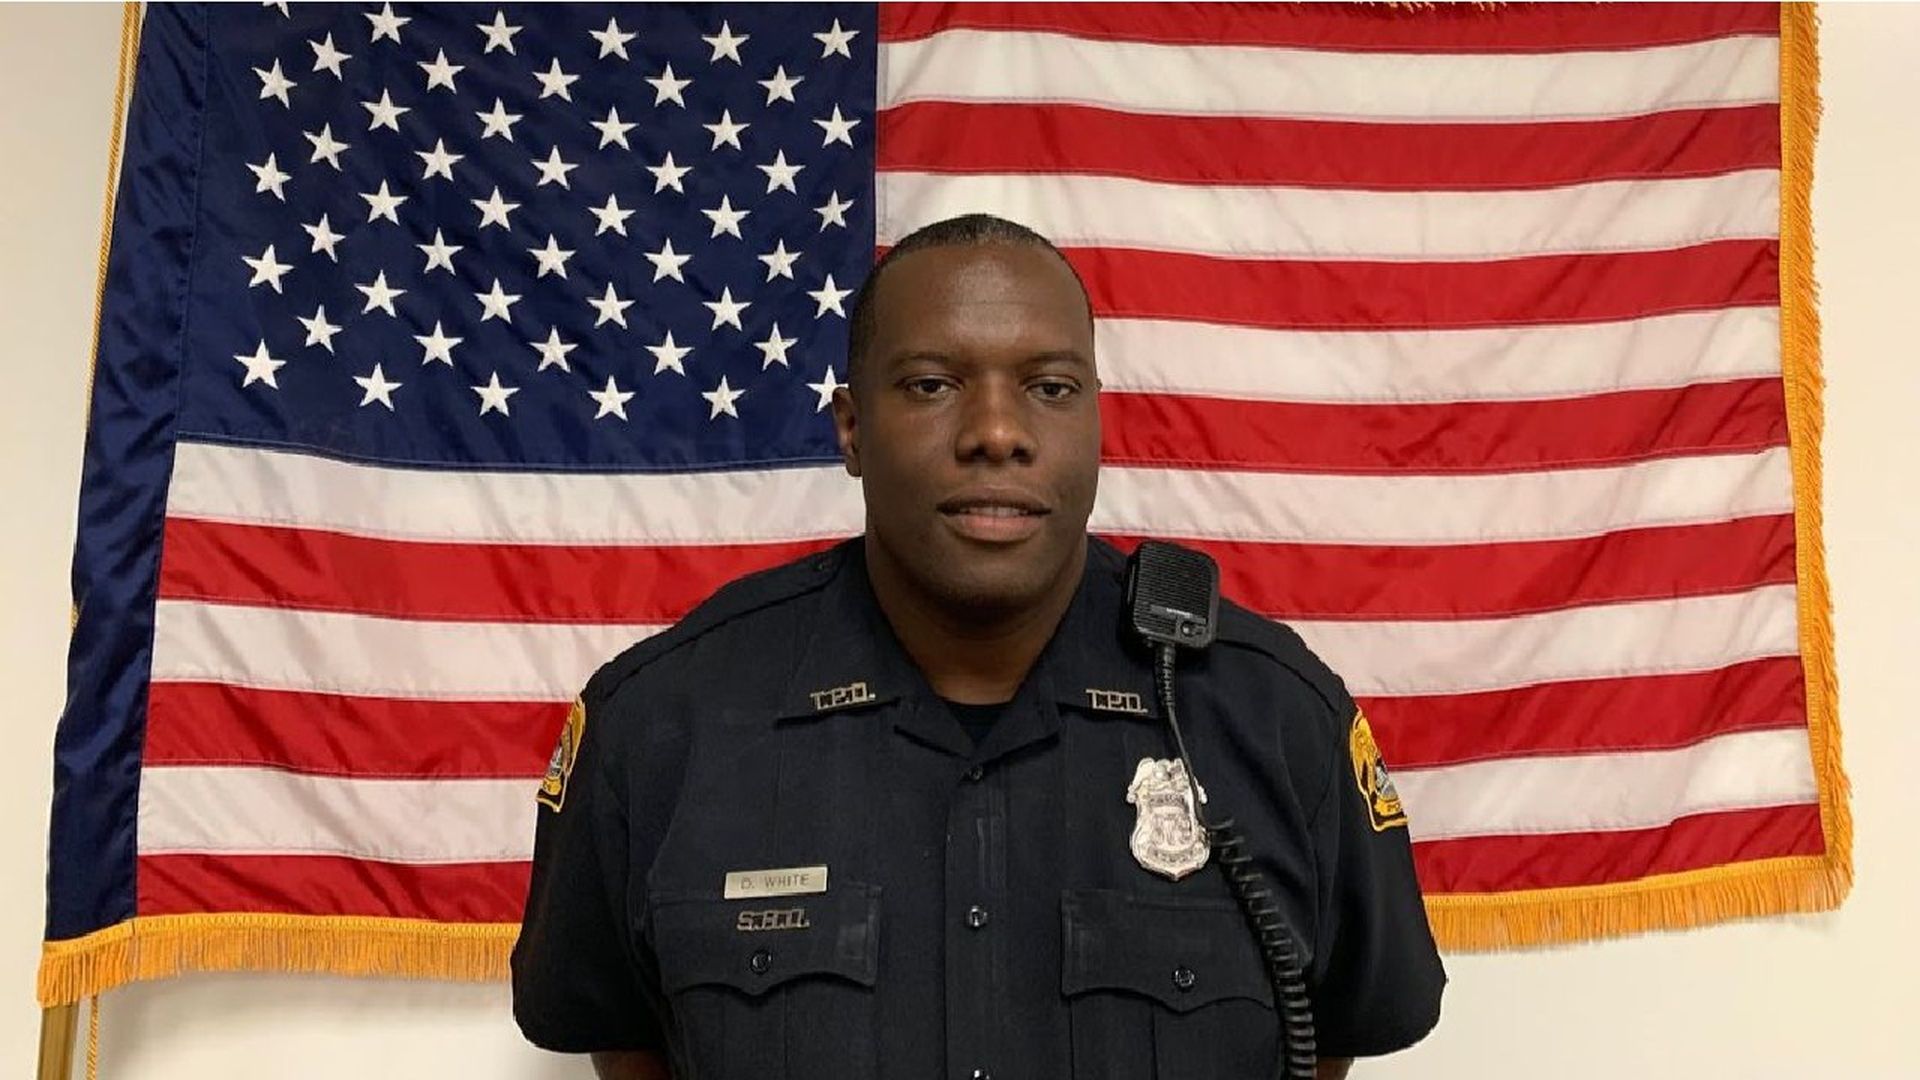 Former Tampa police officer Delvin White stands in uniform in front of an American flag.